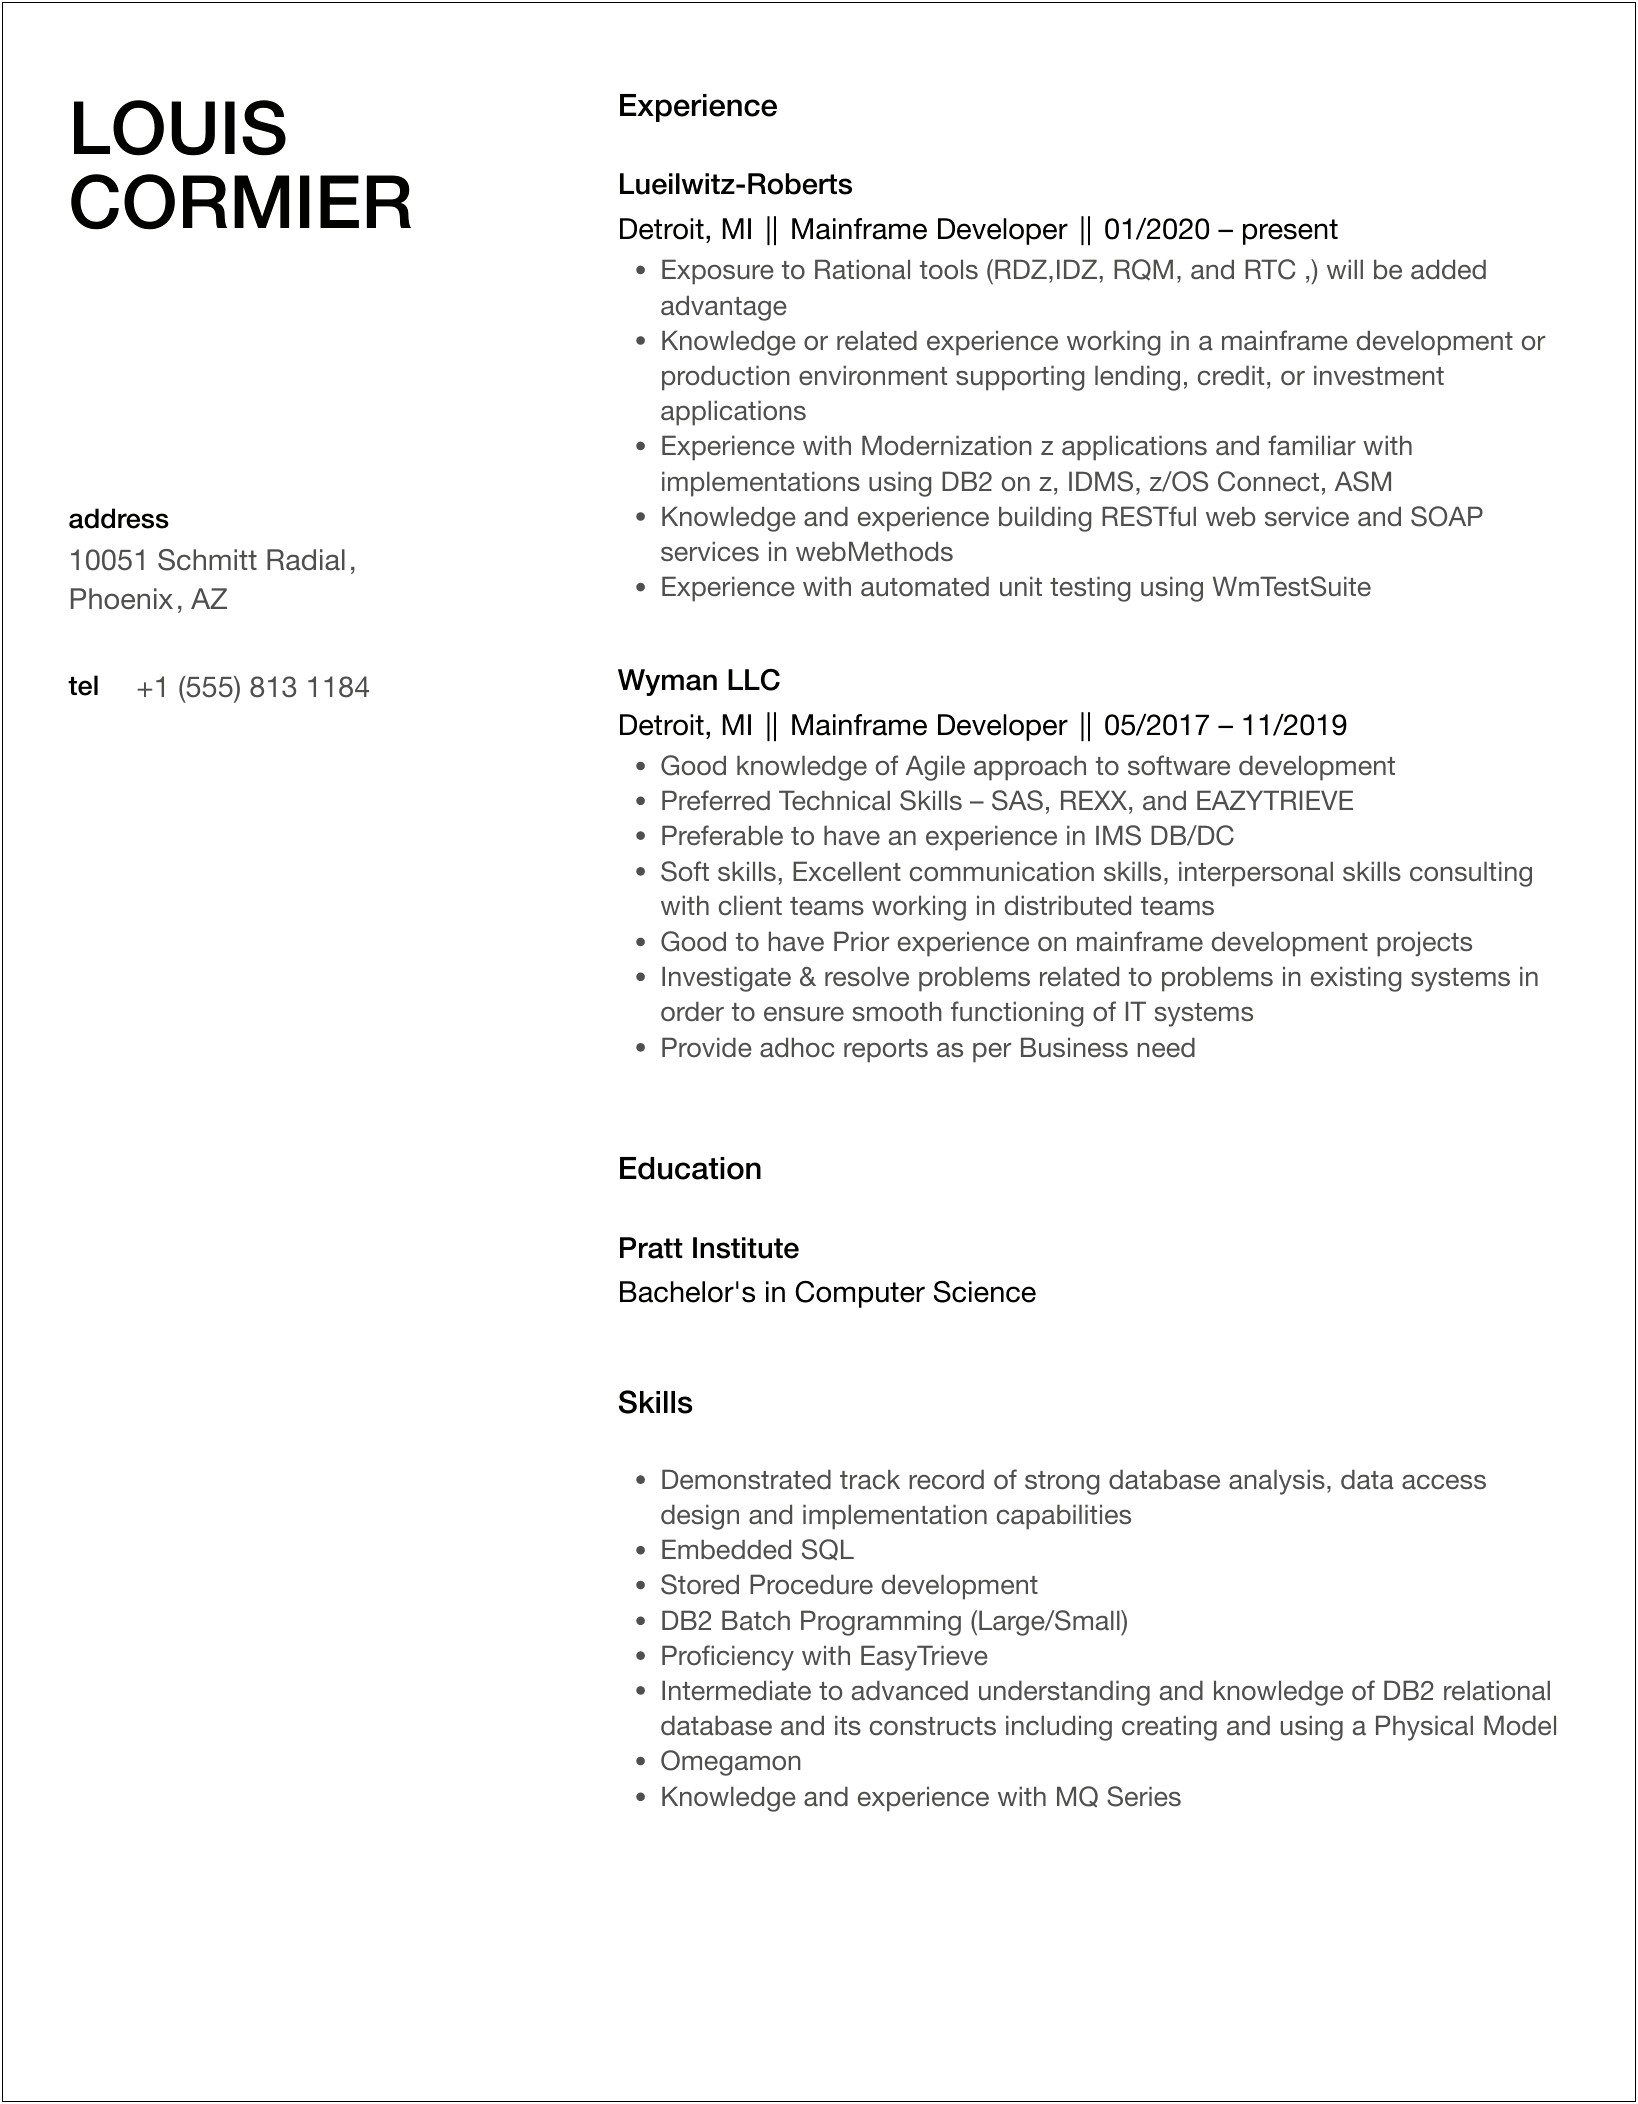 Sample Resume For 5 Years Experience In Mainframe